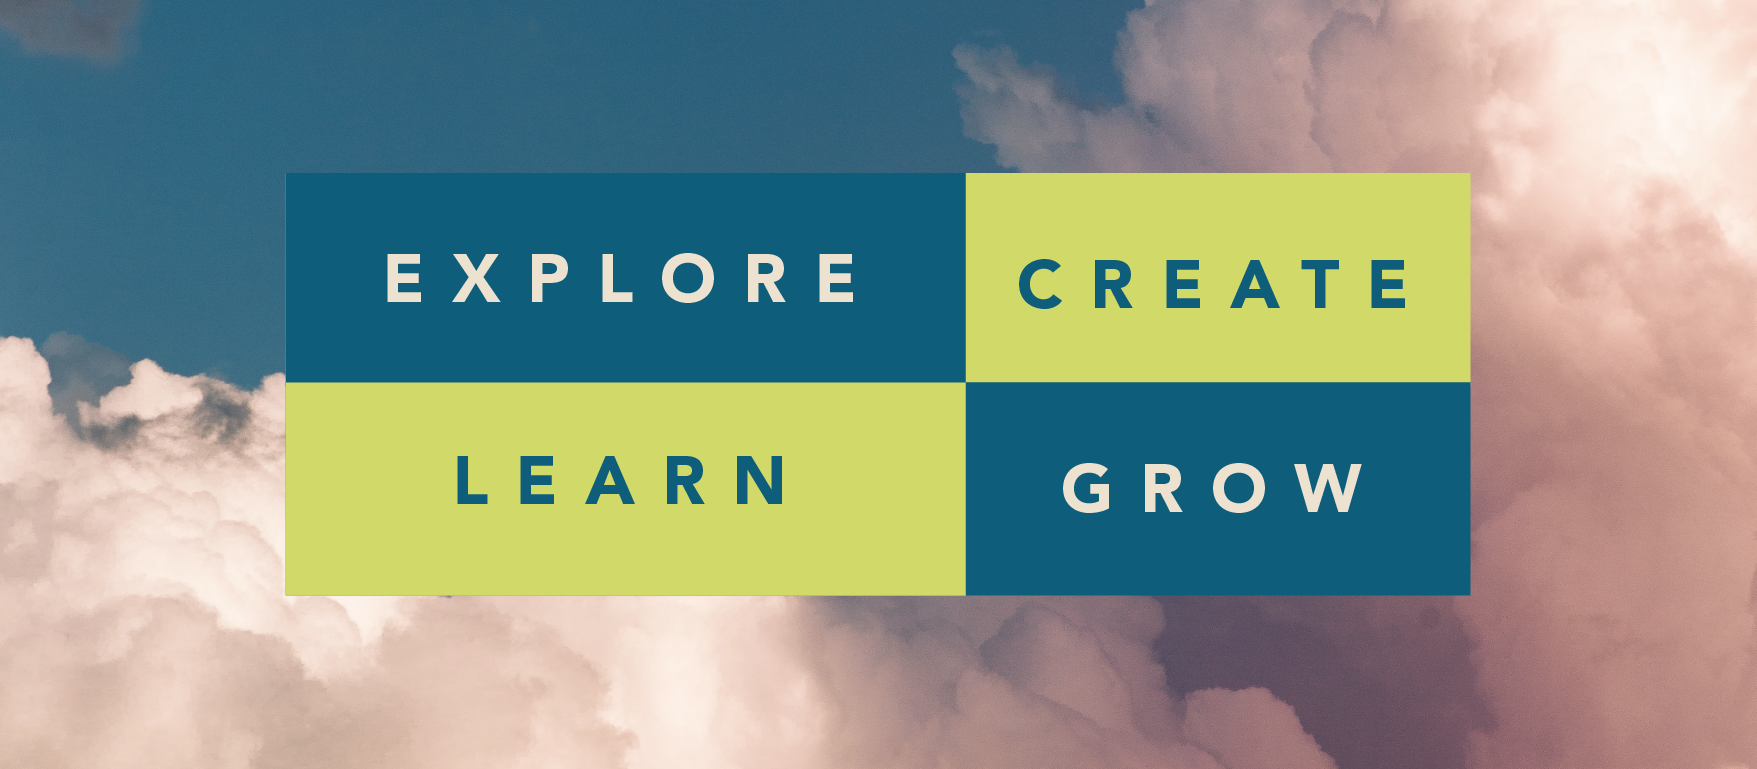 Pinkish clouds with text over the image that reads "Explore, Create, Learn, Grow"